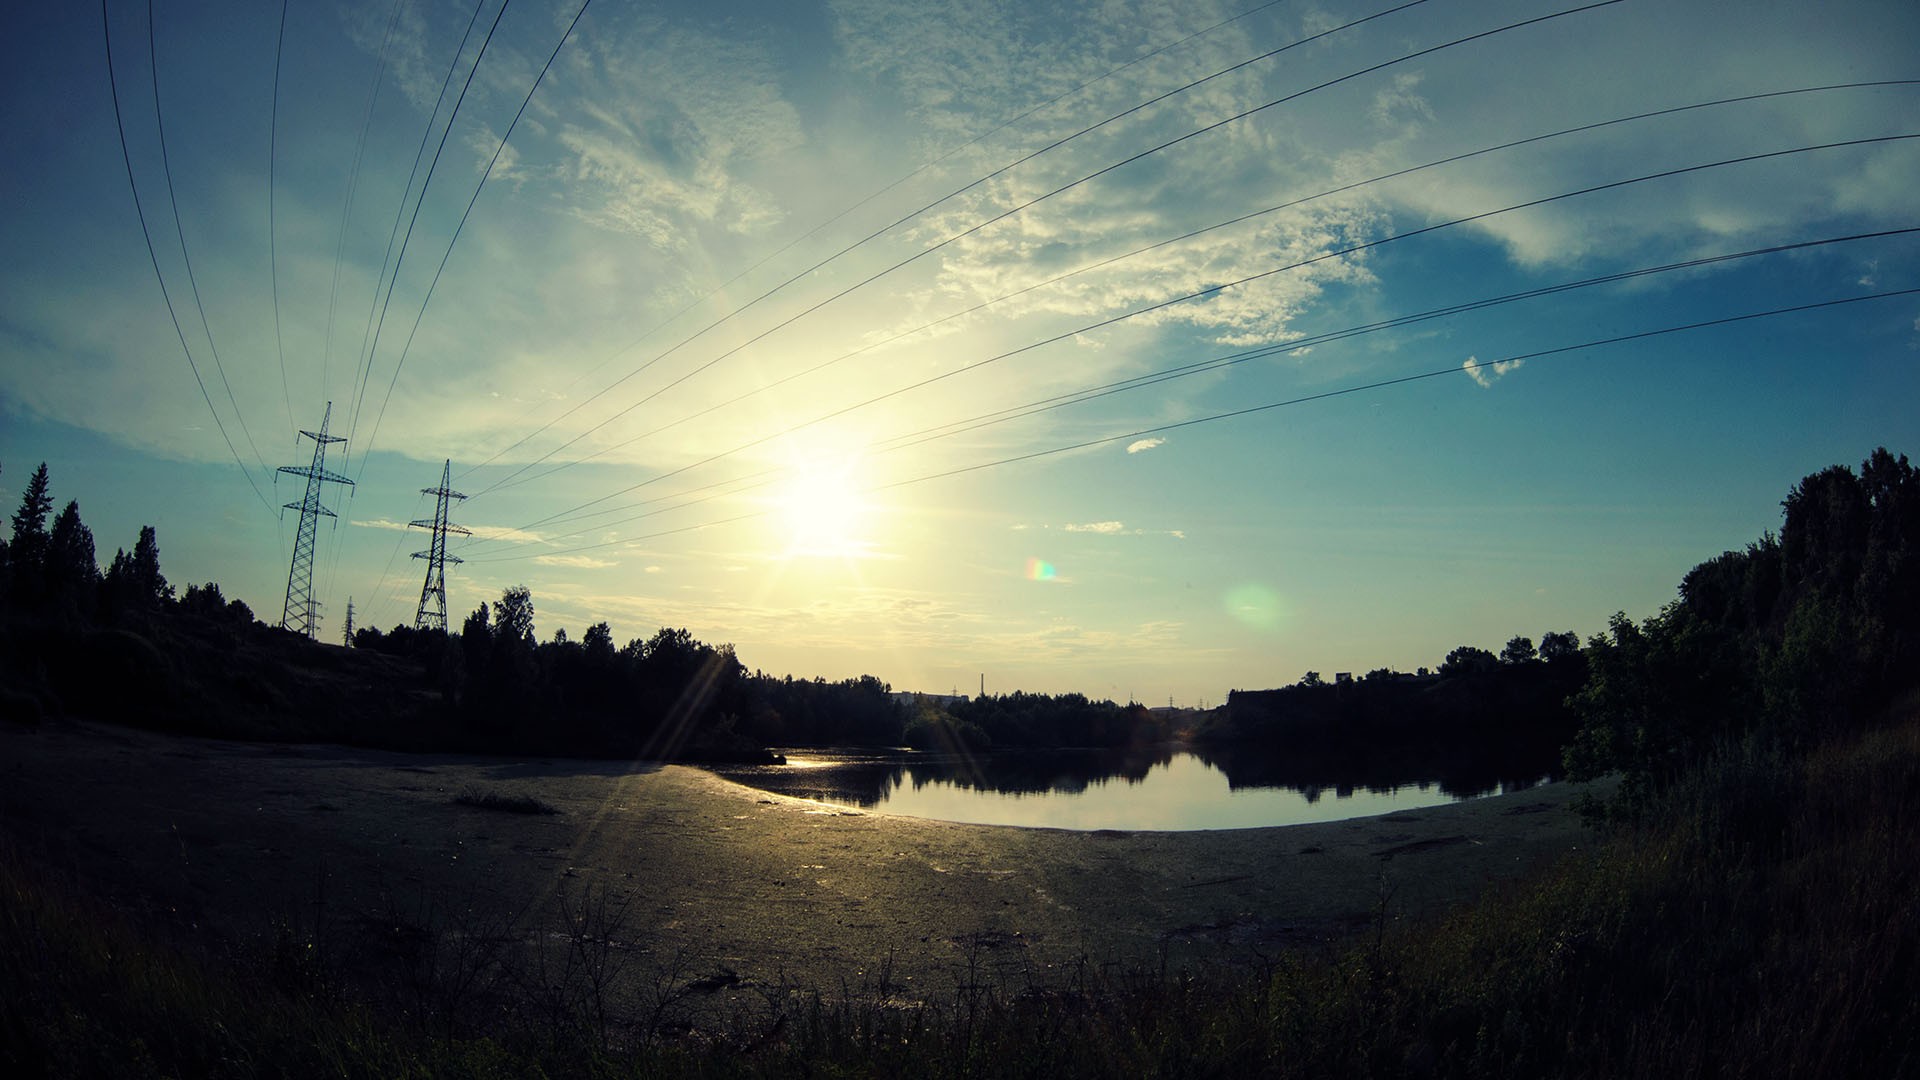 General 1920x1080 lake sky clouds water wires lens flare sunlight landscape power lines utility pole